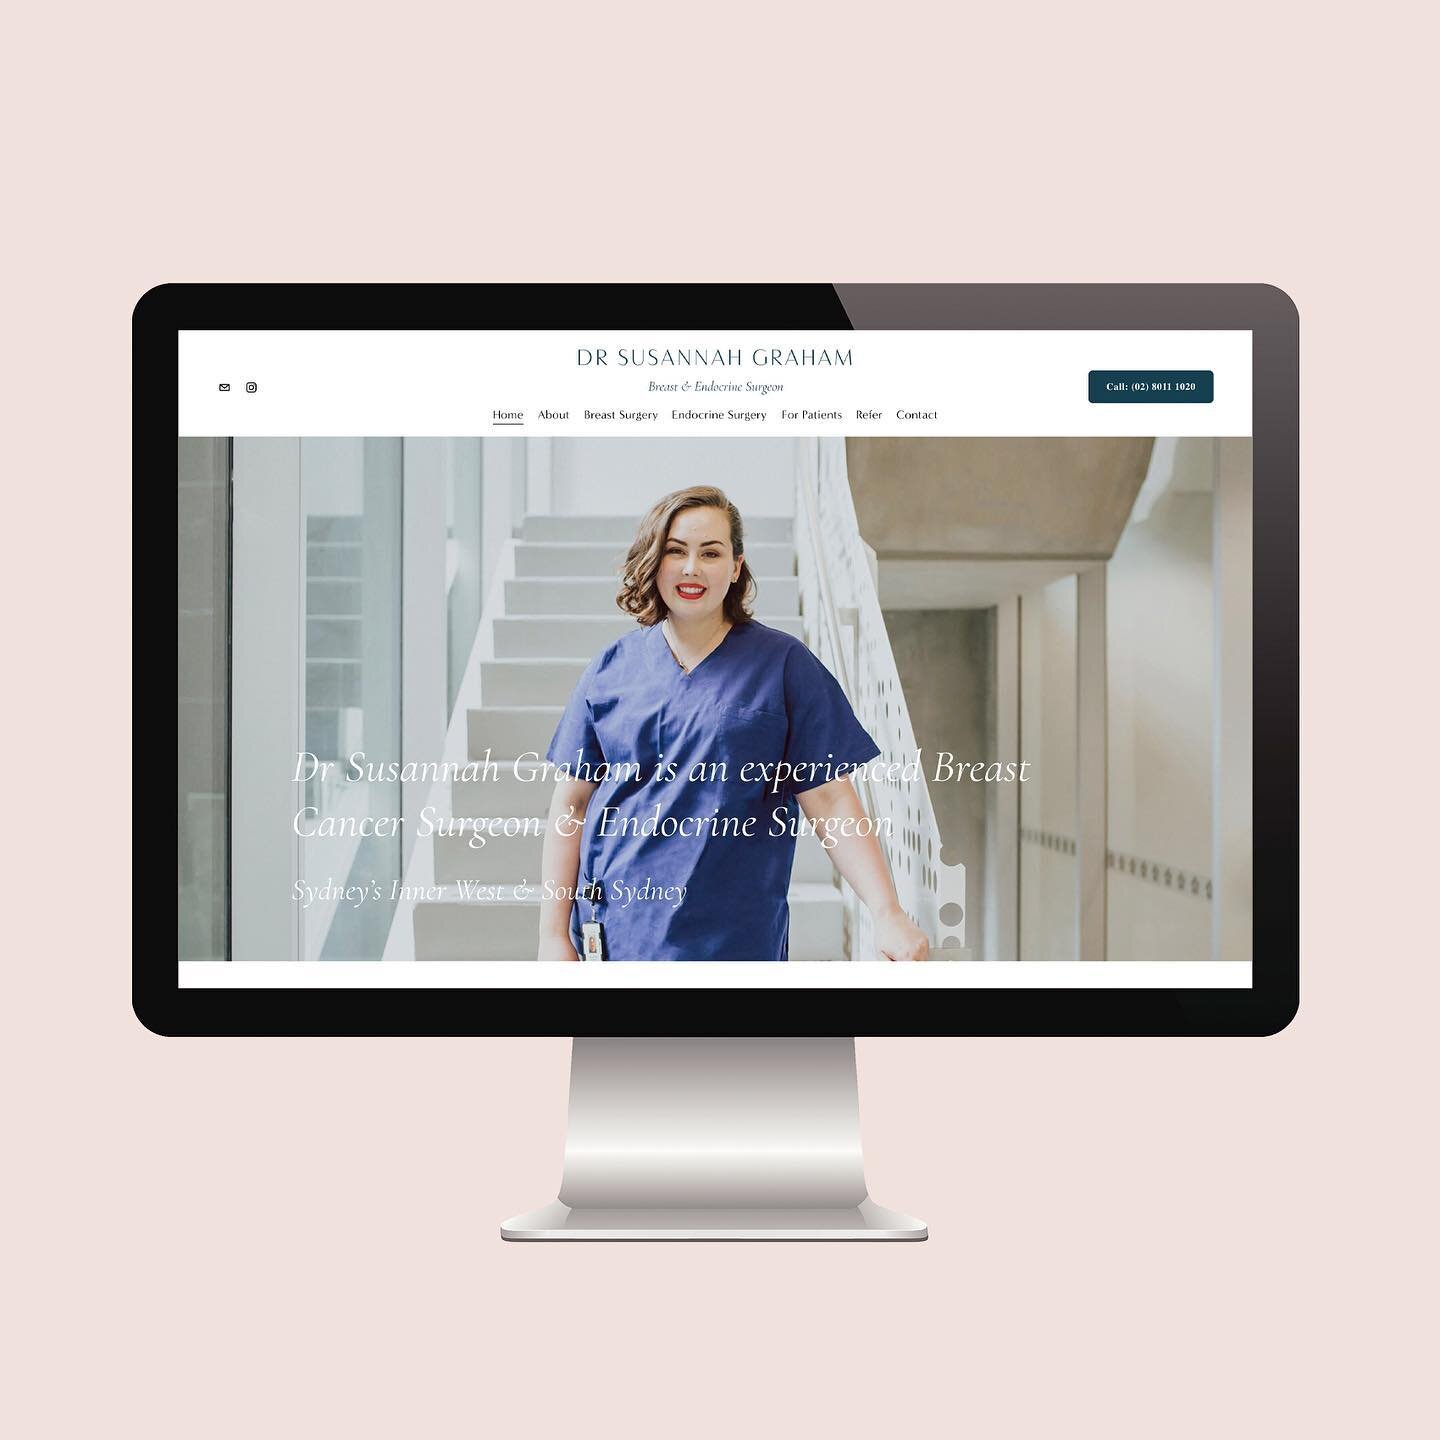 With my new website, I&rsquo;ve tried to make it as easy as possible for doctors to make referrals, and for patients and doctors to find all the information they need about where I practice from and what I specialise in. 

Link in bio.

#breastsurgeo